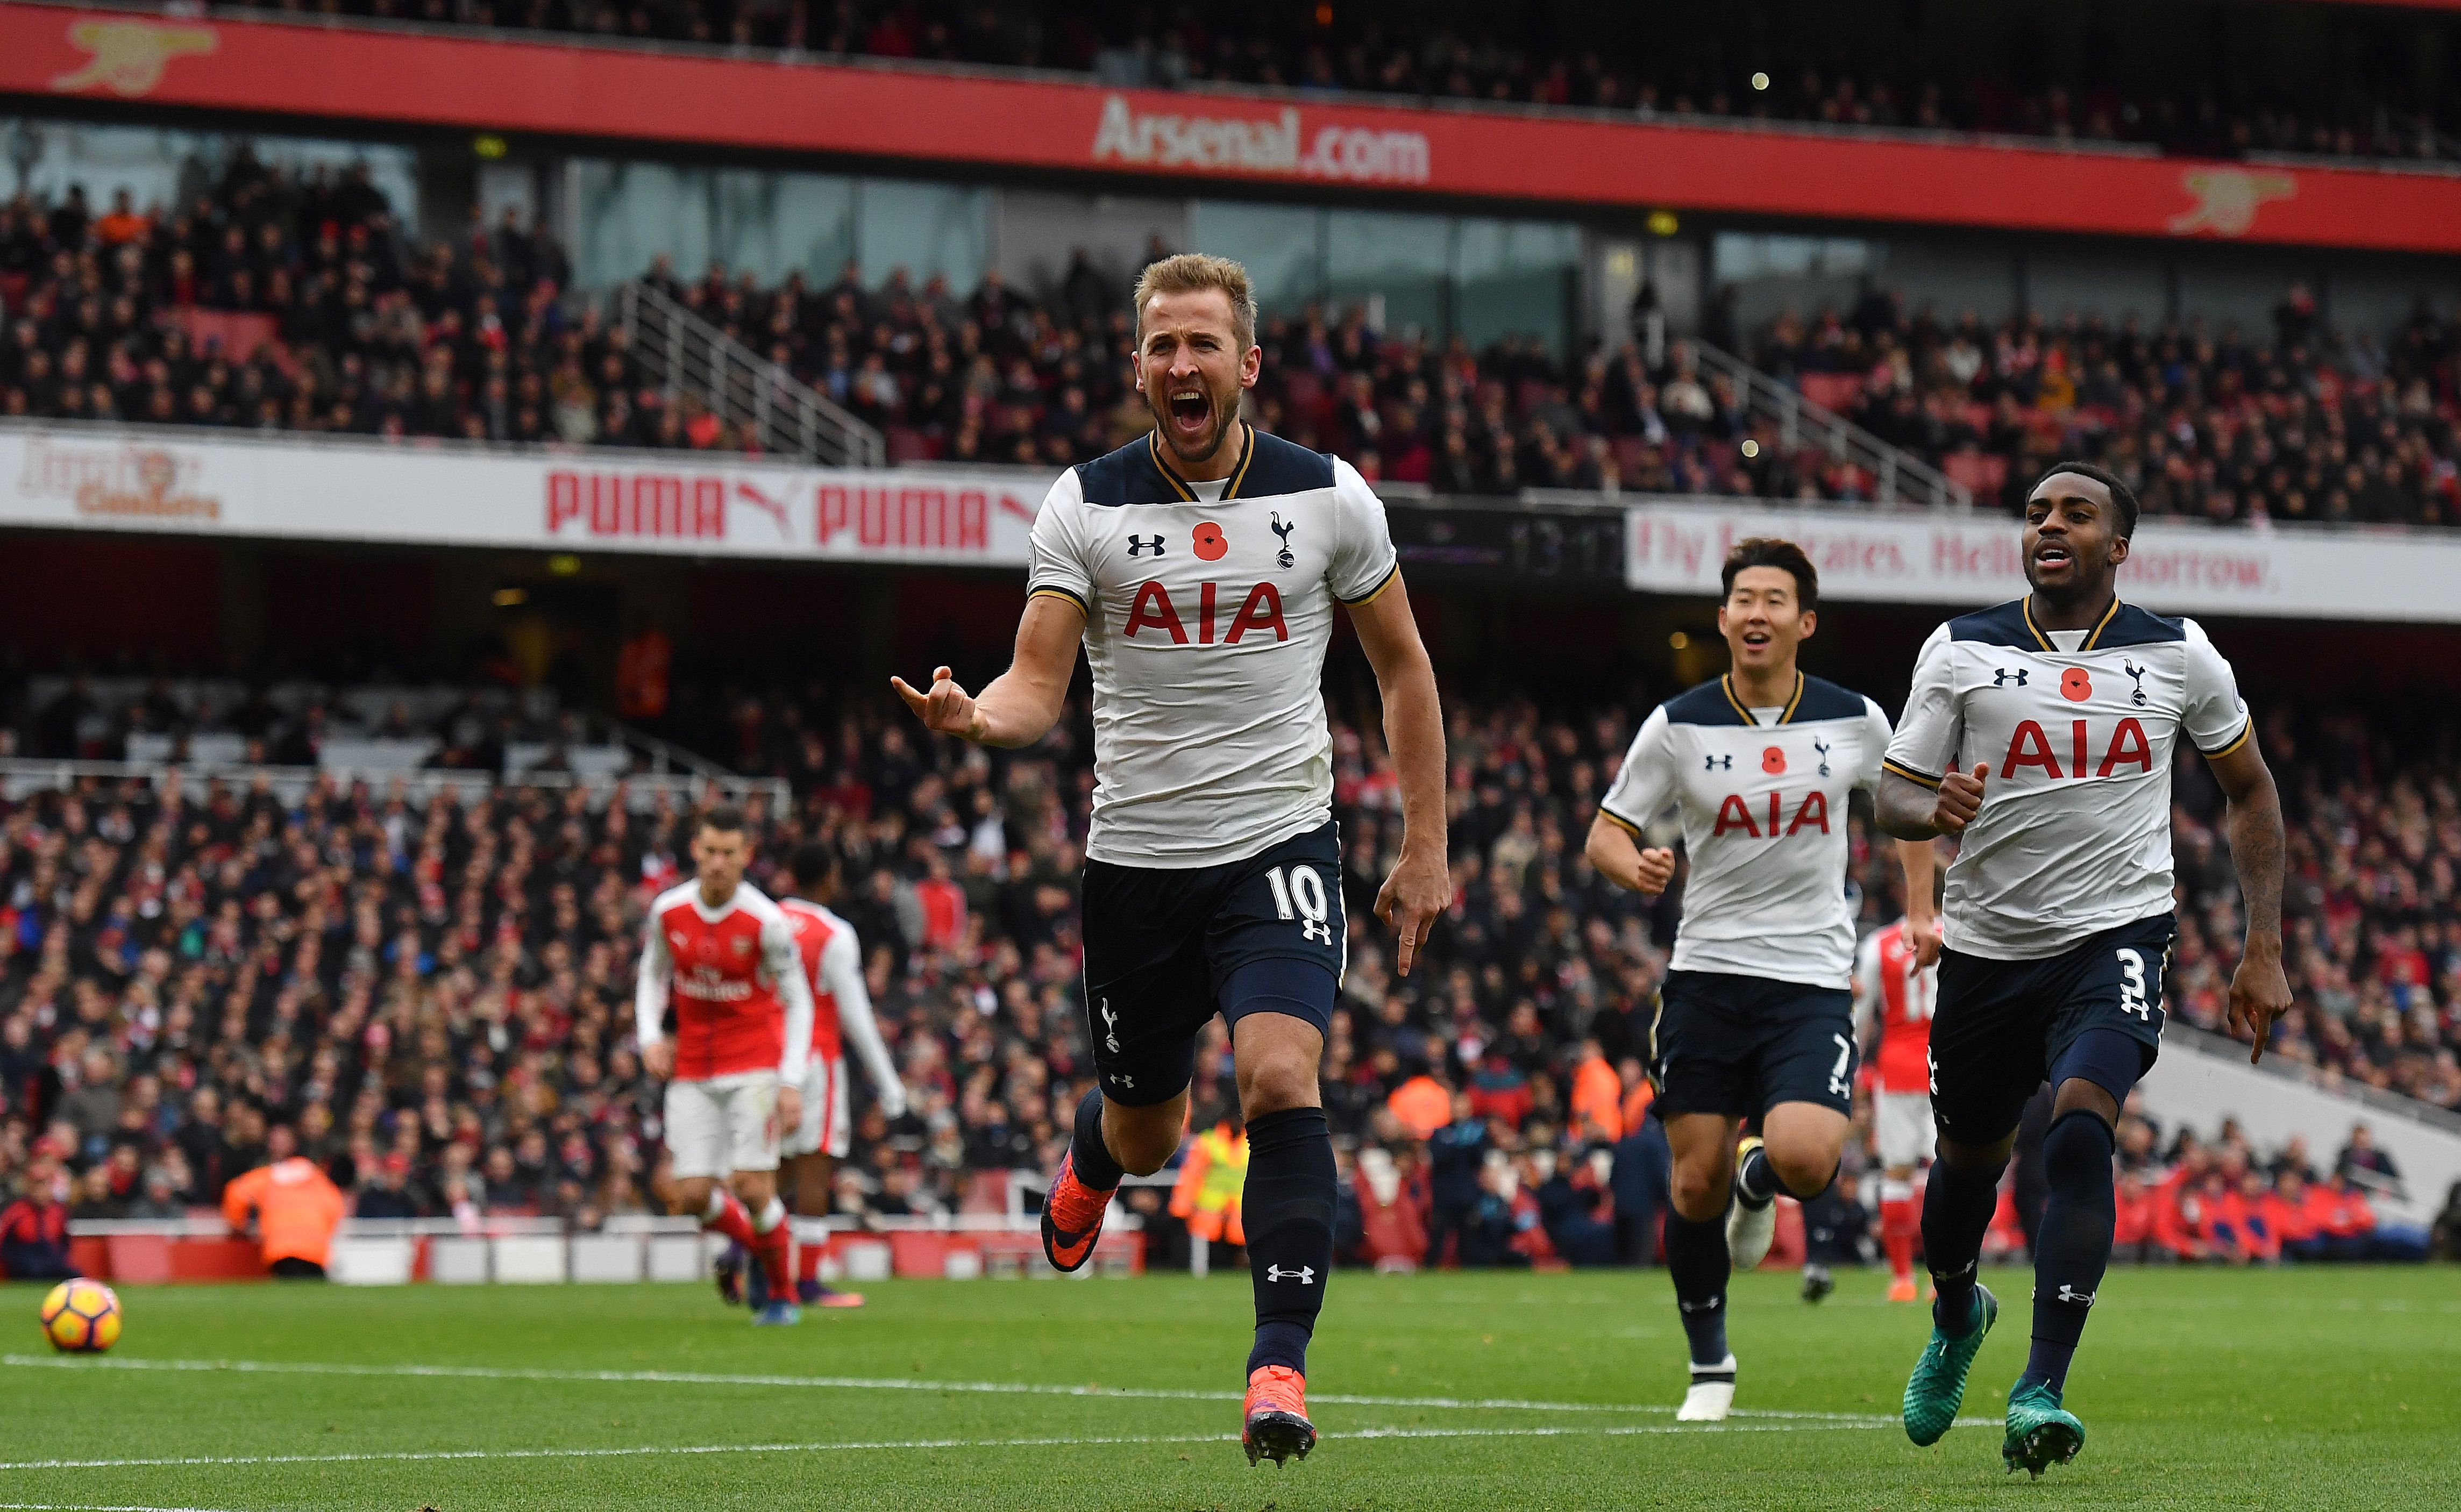 Tottenham Hotspur's English striker Harry Kane (c) celebrates scoring his team's first goal from the penalty spot during the English Premier League football match between Arsenal and Tottenham Hotspur at the Emirates Stadium in London on November 6, 2016.        (Photo by BEN STANSALL/AFP/Getty Images)